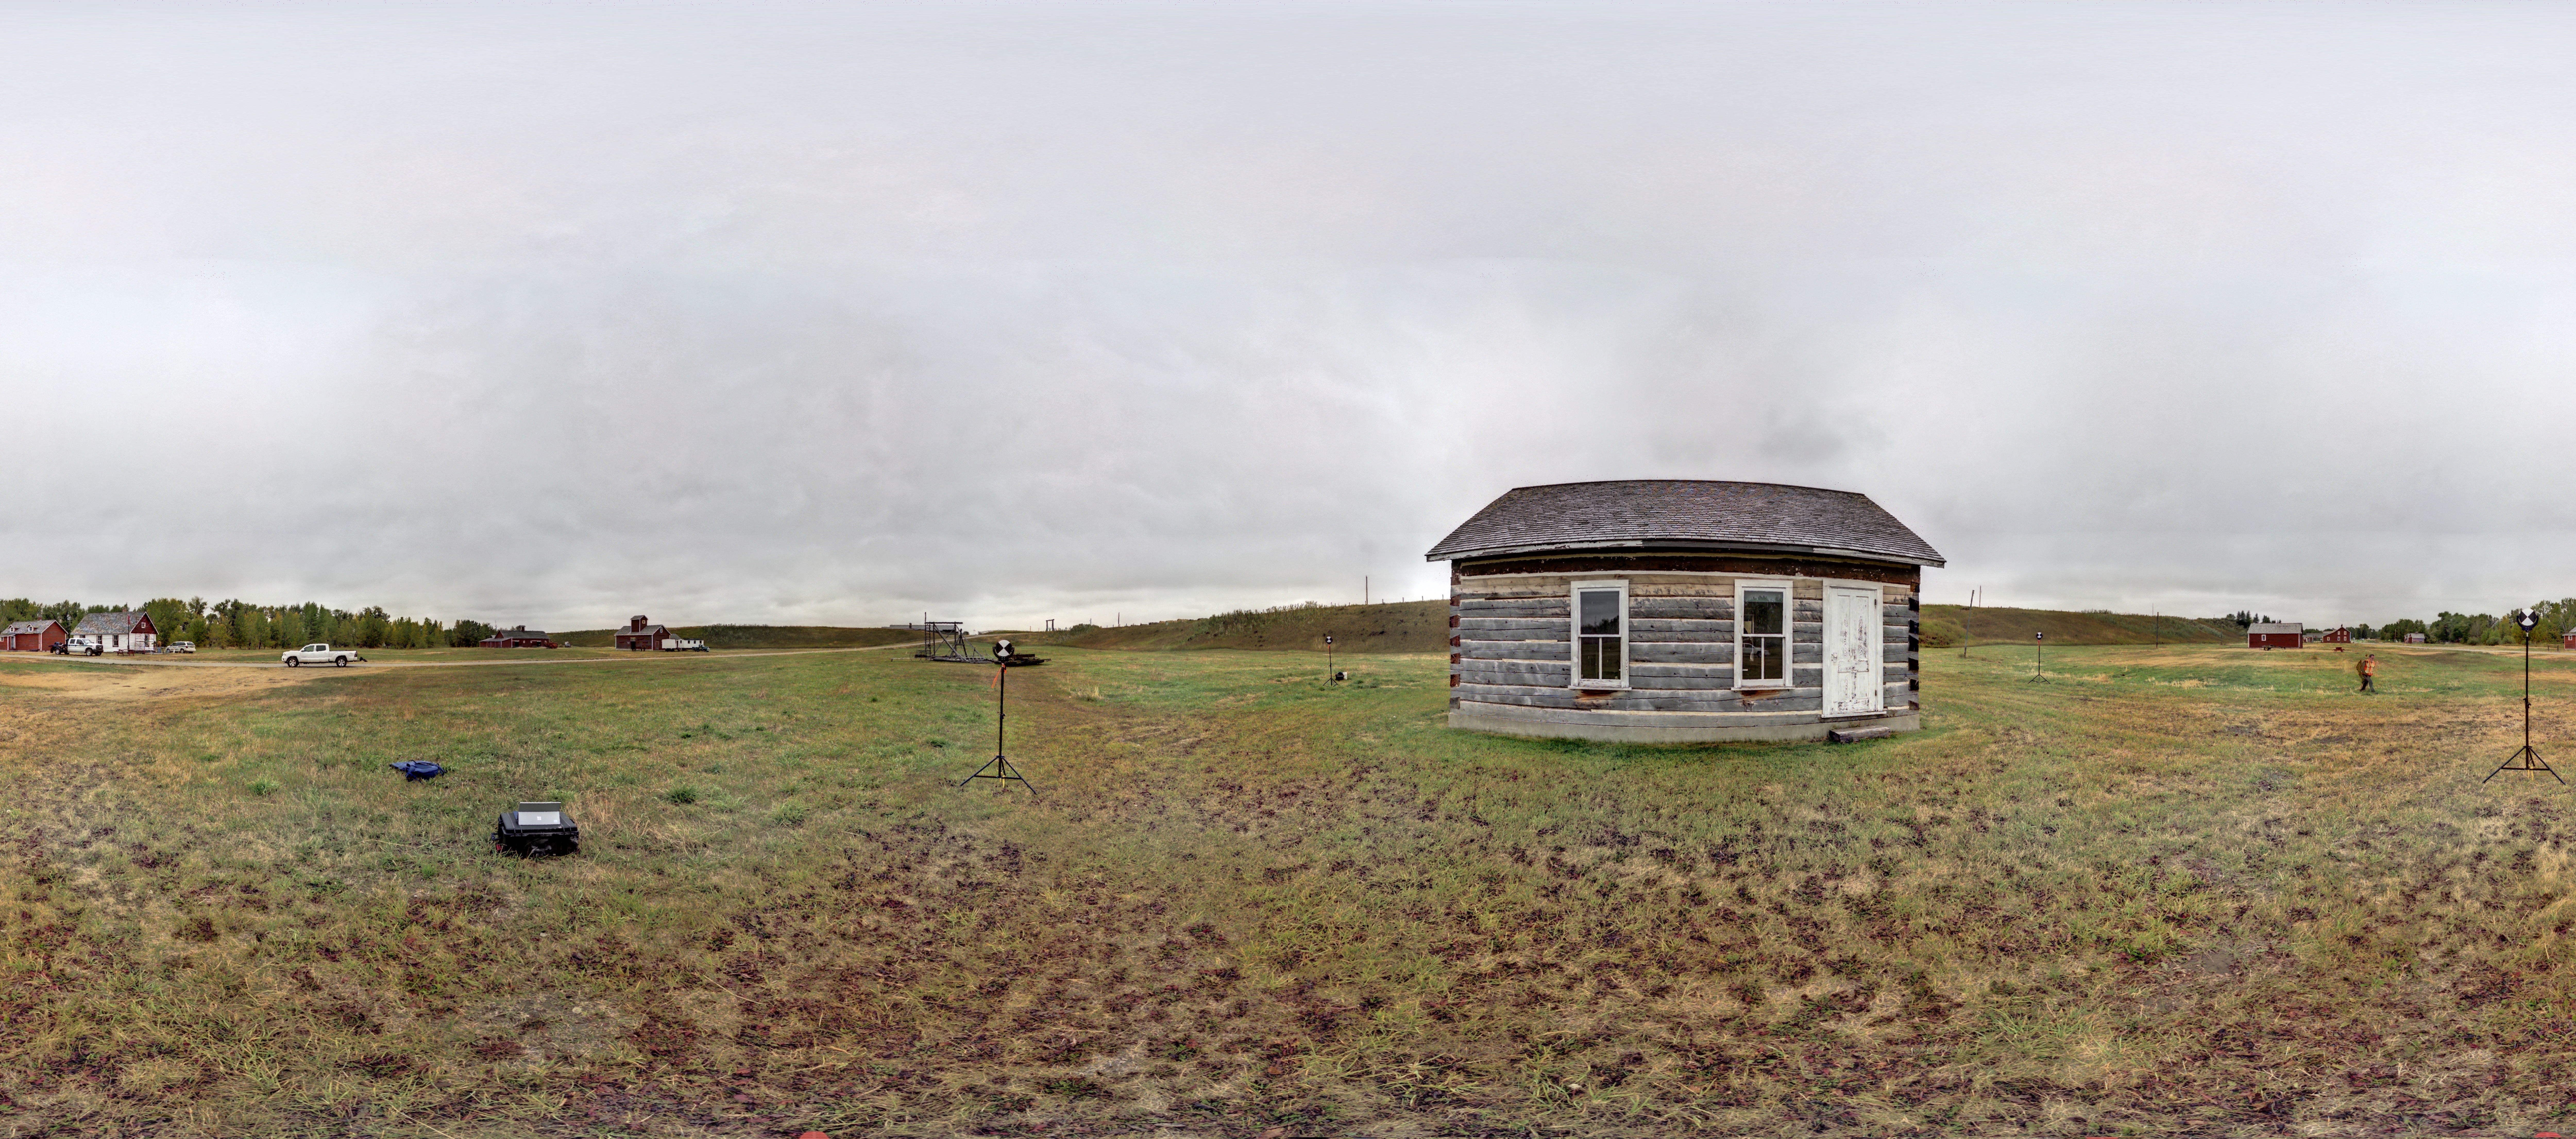 Panoramic image of scanning location 1 of the exterior of the Foreman's House at Bar U Ranch